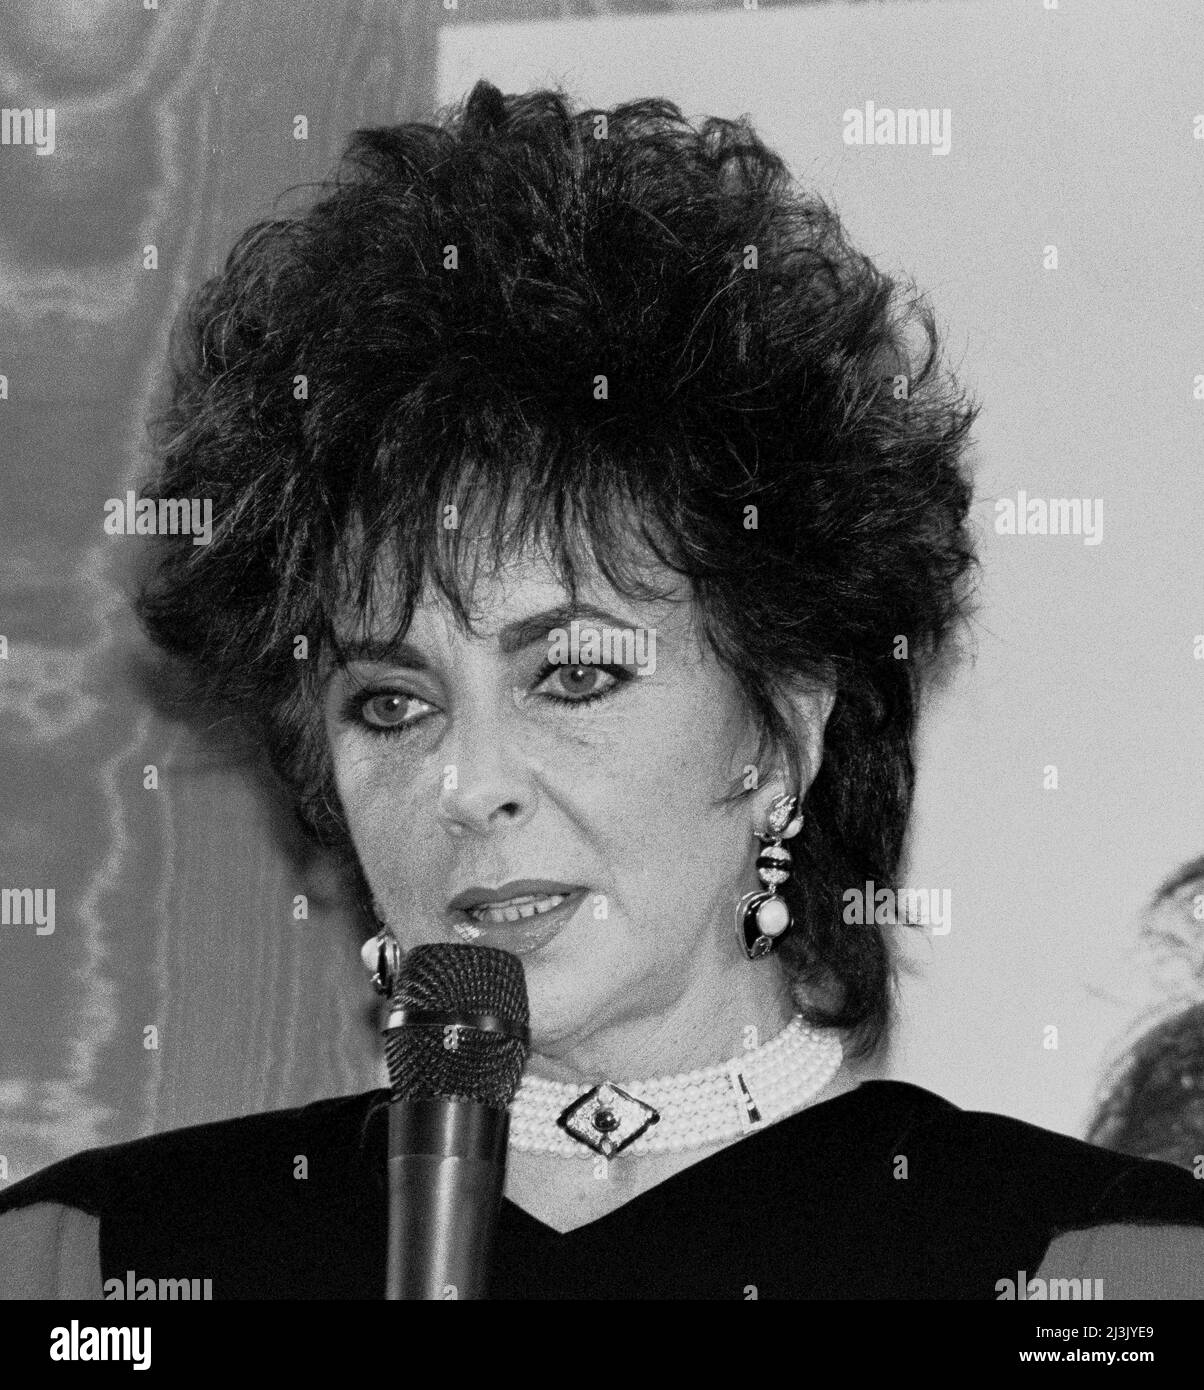 Elizabeth Taylor, promoting her perfume line in a store in San Francisco, California, Stock Photo